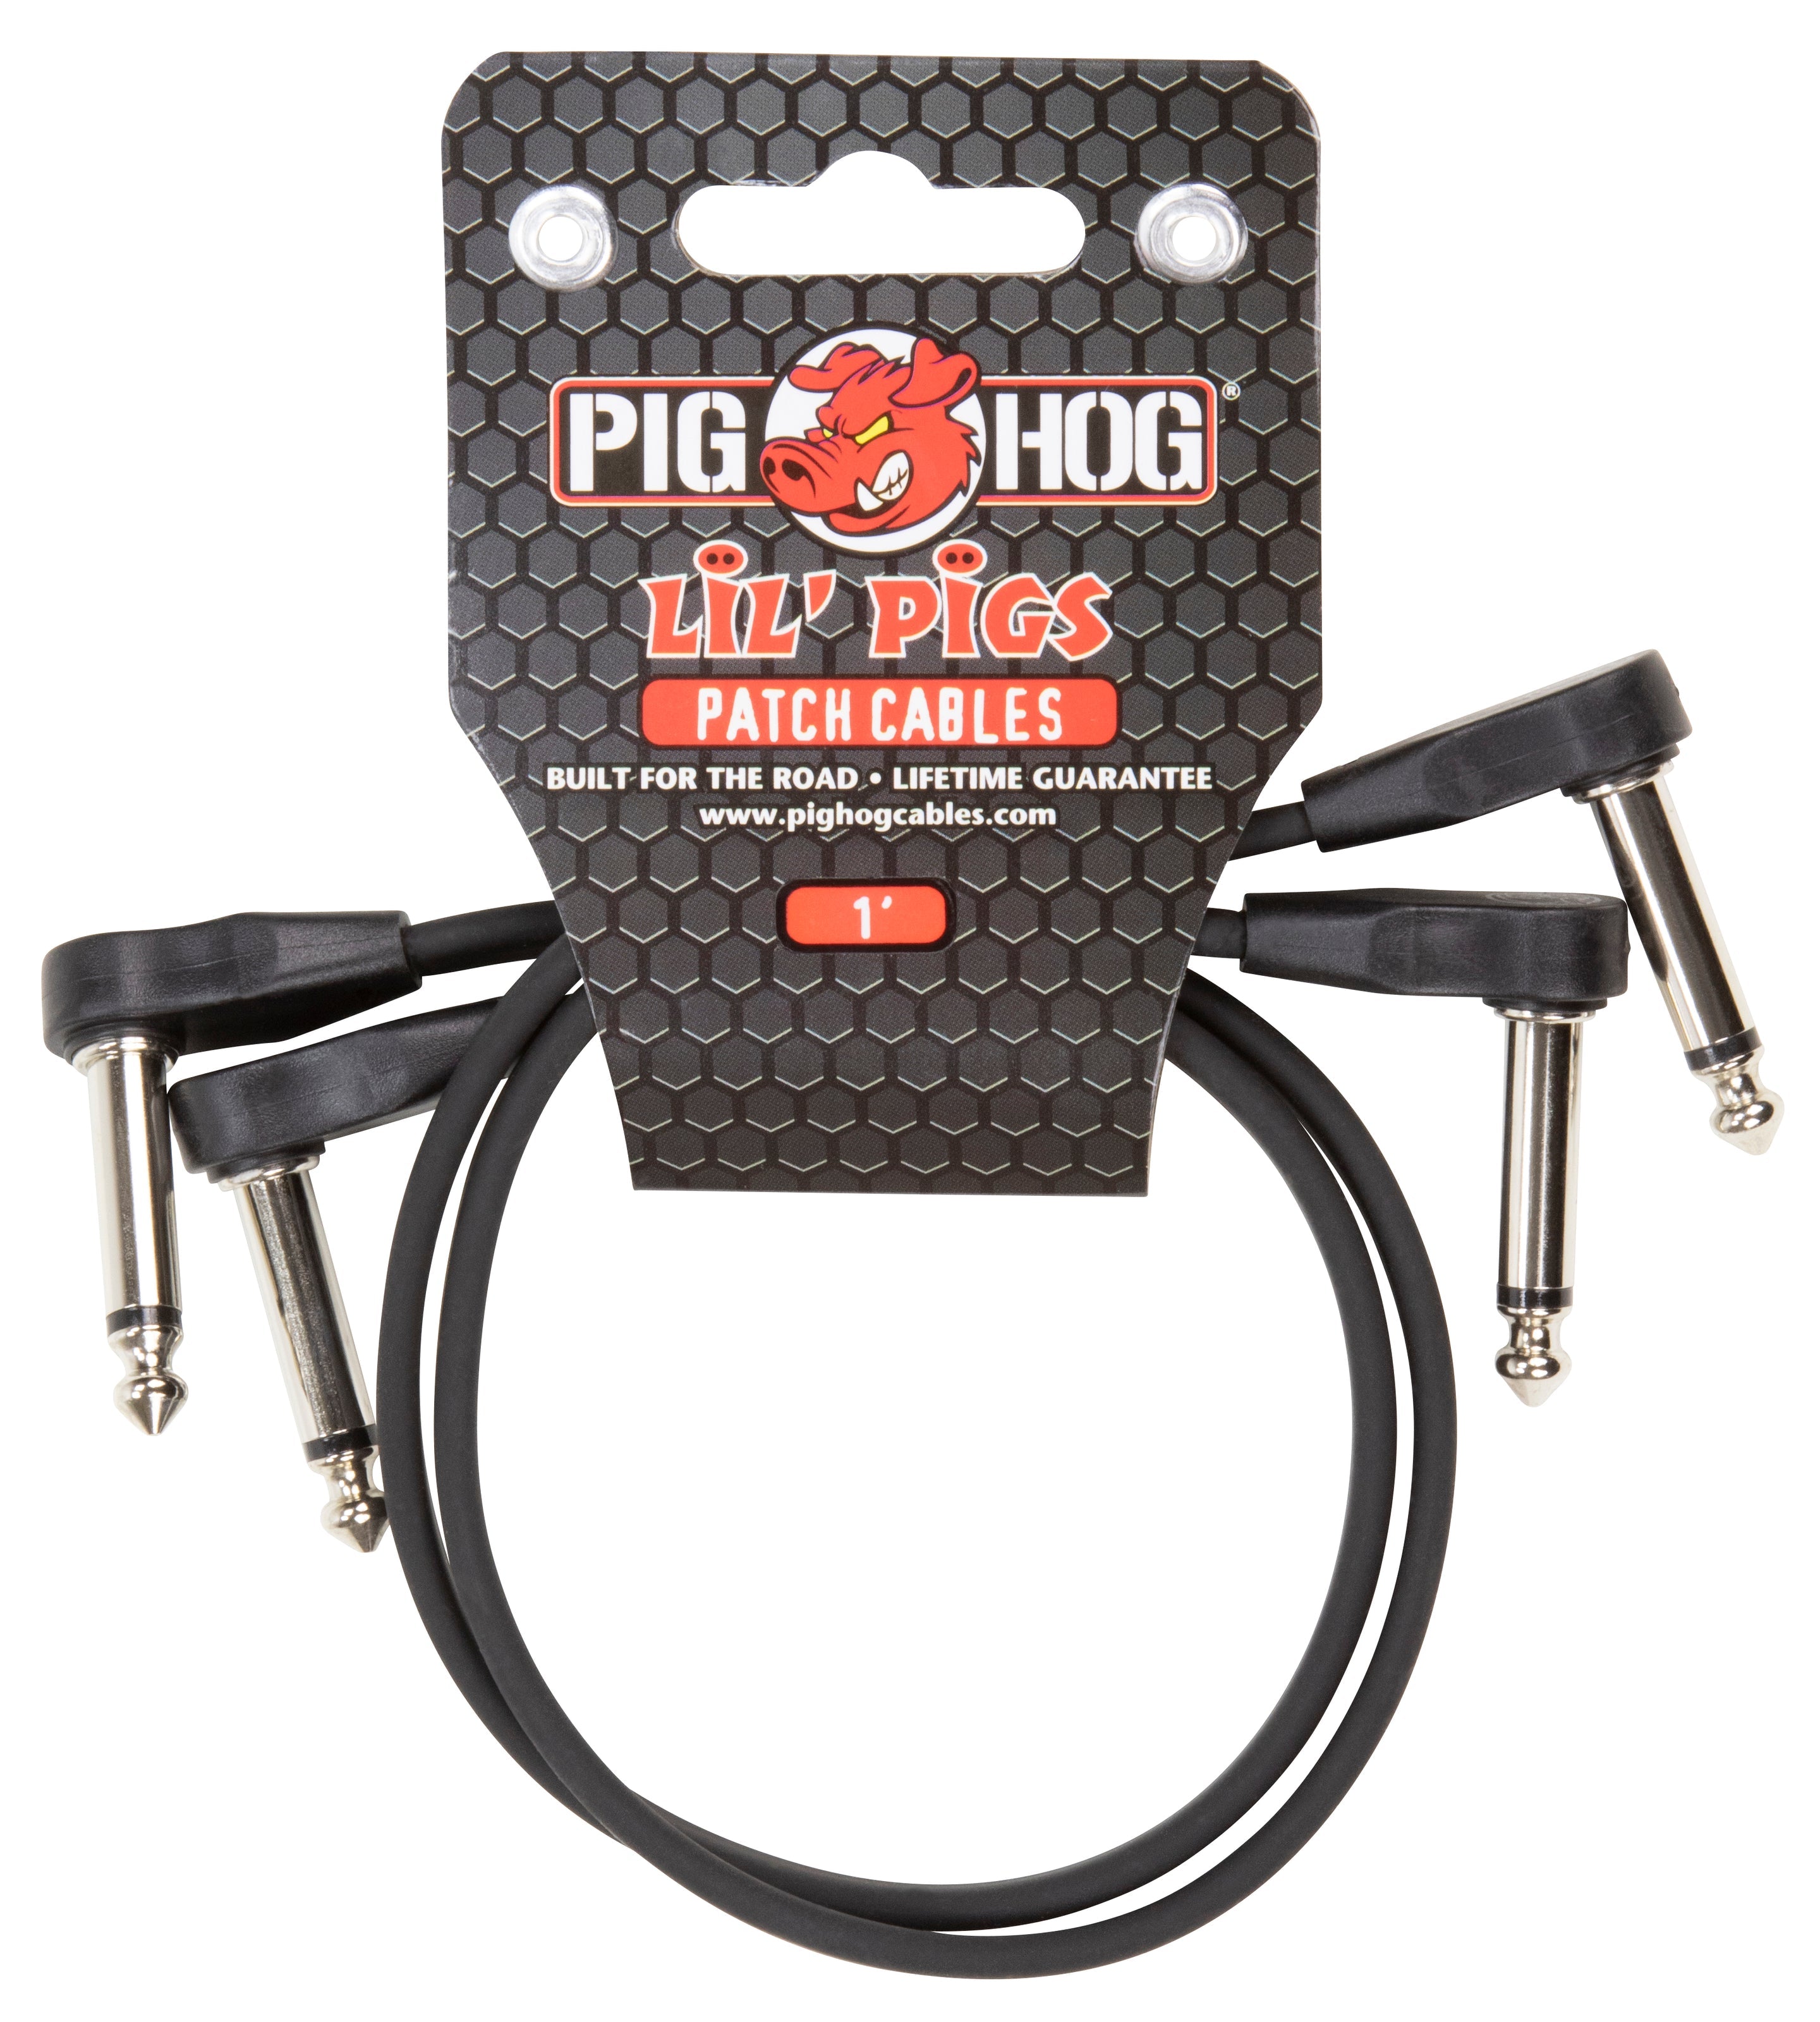 Pig Hog "Lil Pigs" 1ft Low Profile Patch Cables, 2 Pack